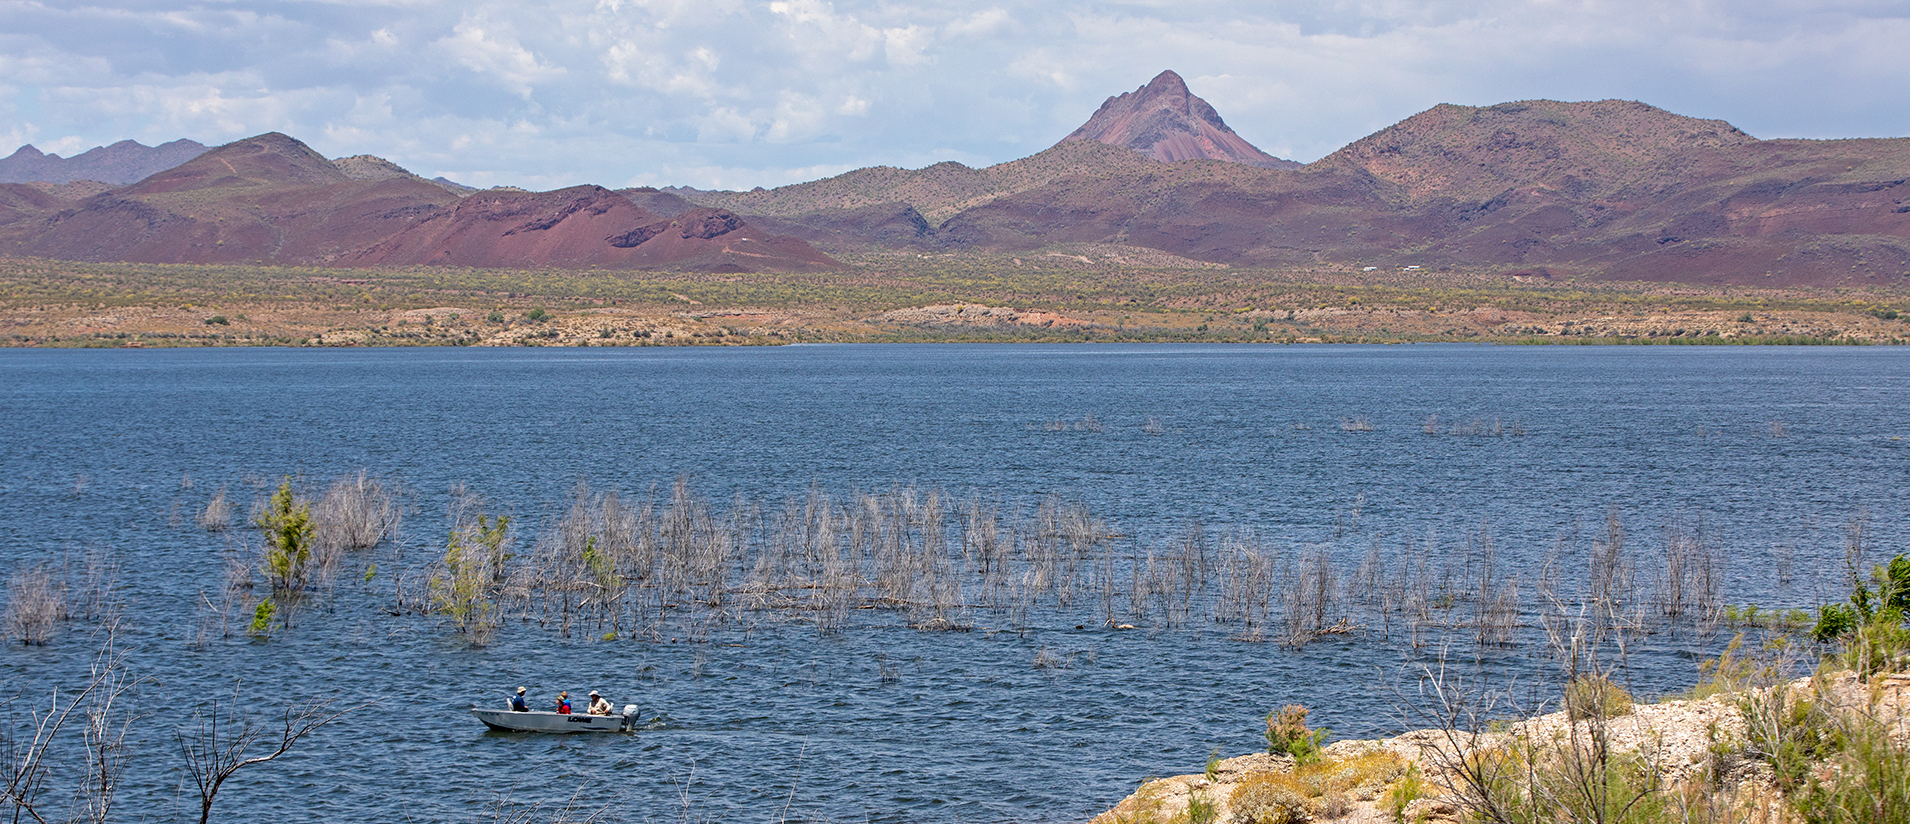 A small boat in the water with purple mountains in the background